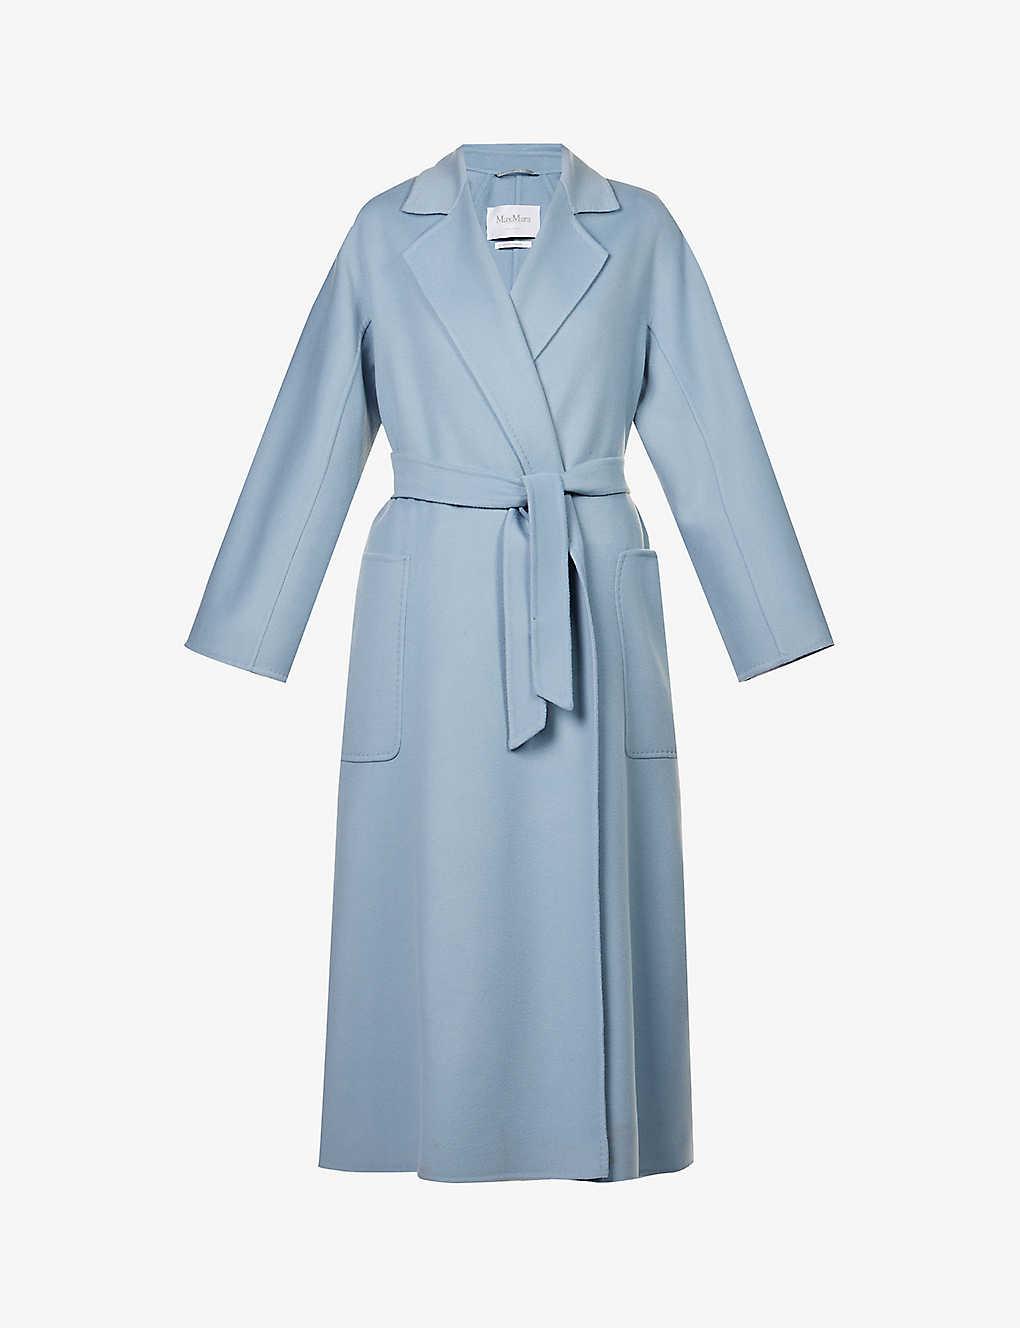 Max Mara Cadimo Belted Wool-cashmere Blend Coat in Blue | Lyst